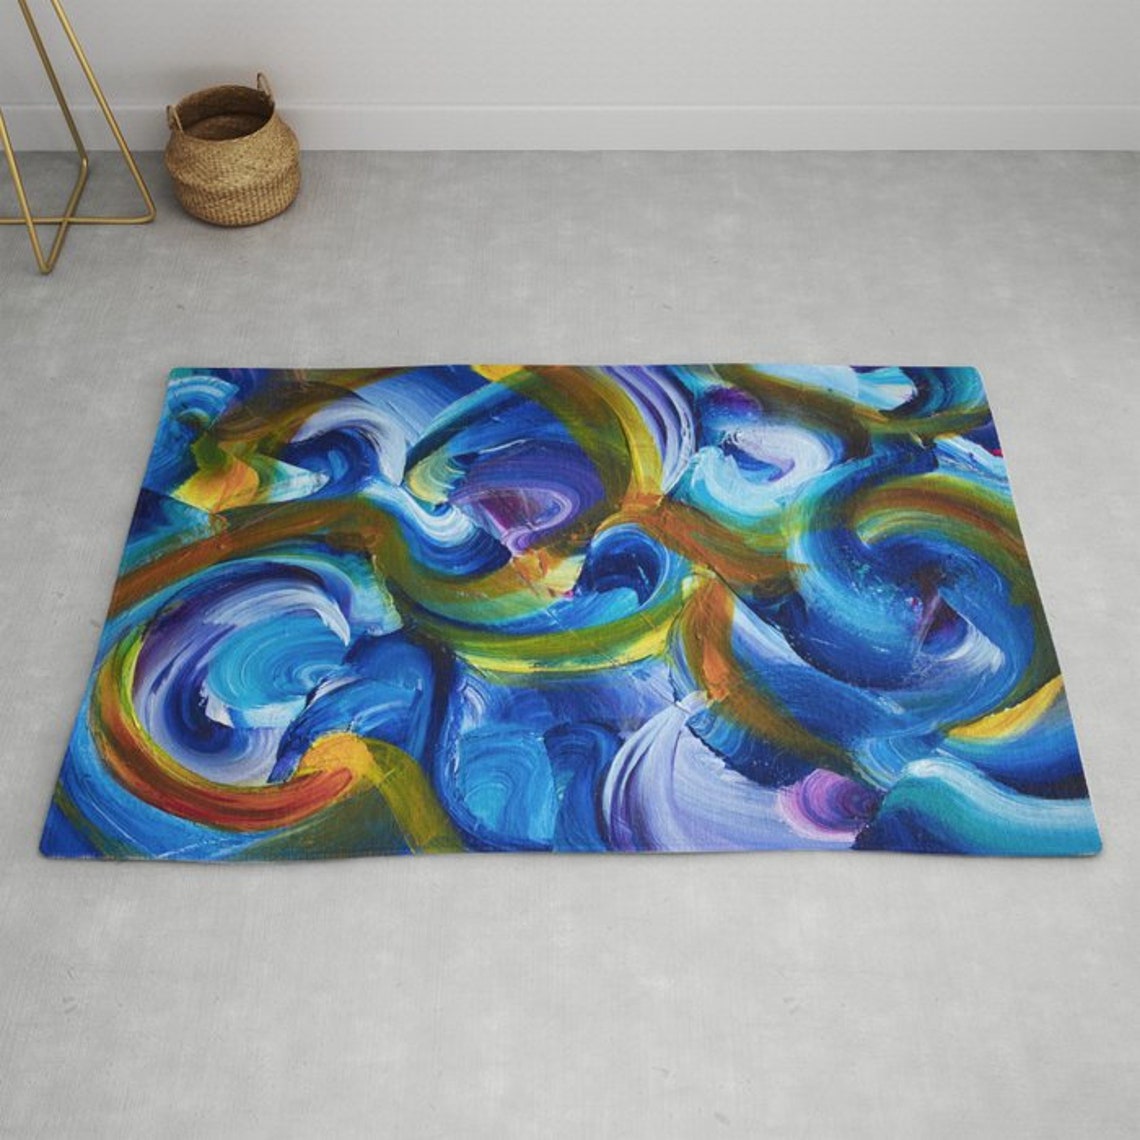 Abstract Art Rug Blue Rugs Swirly Unique Rugs 2x3 3x5 4x6 5x7 - Etsy